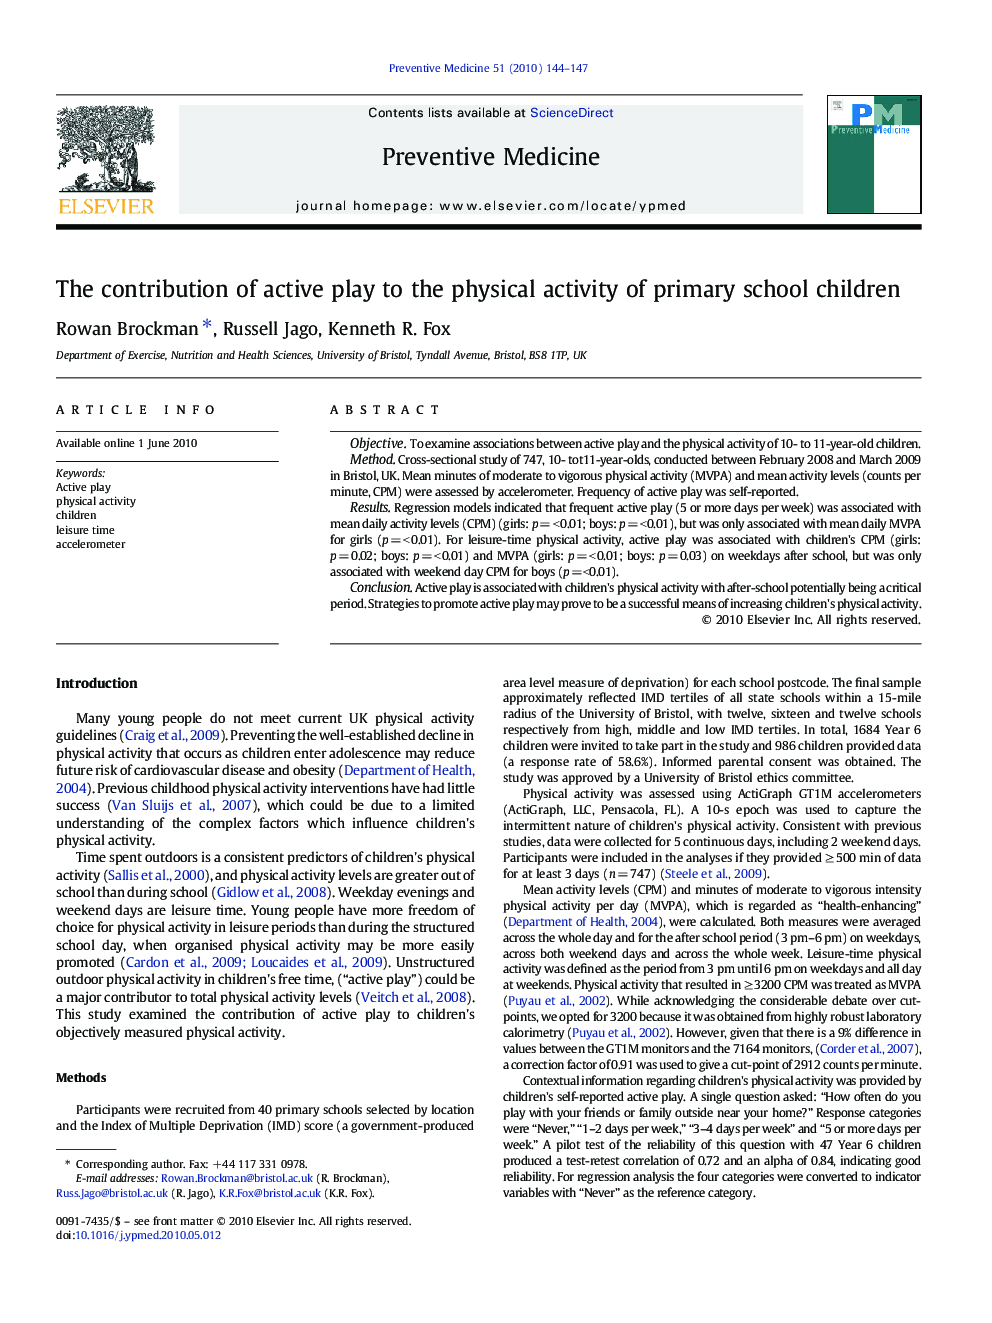 The contribution of active play to the physical activity of primary school children